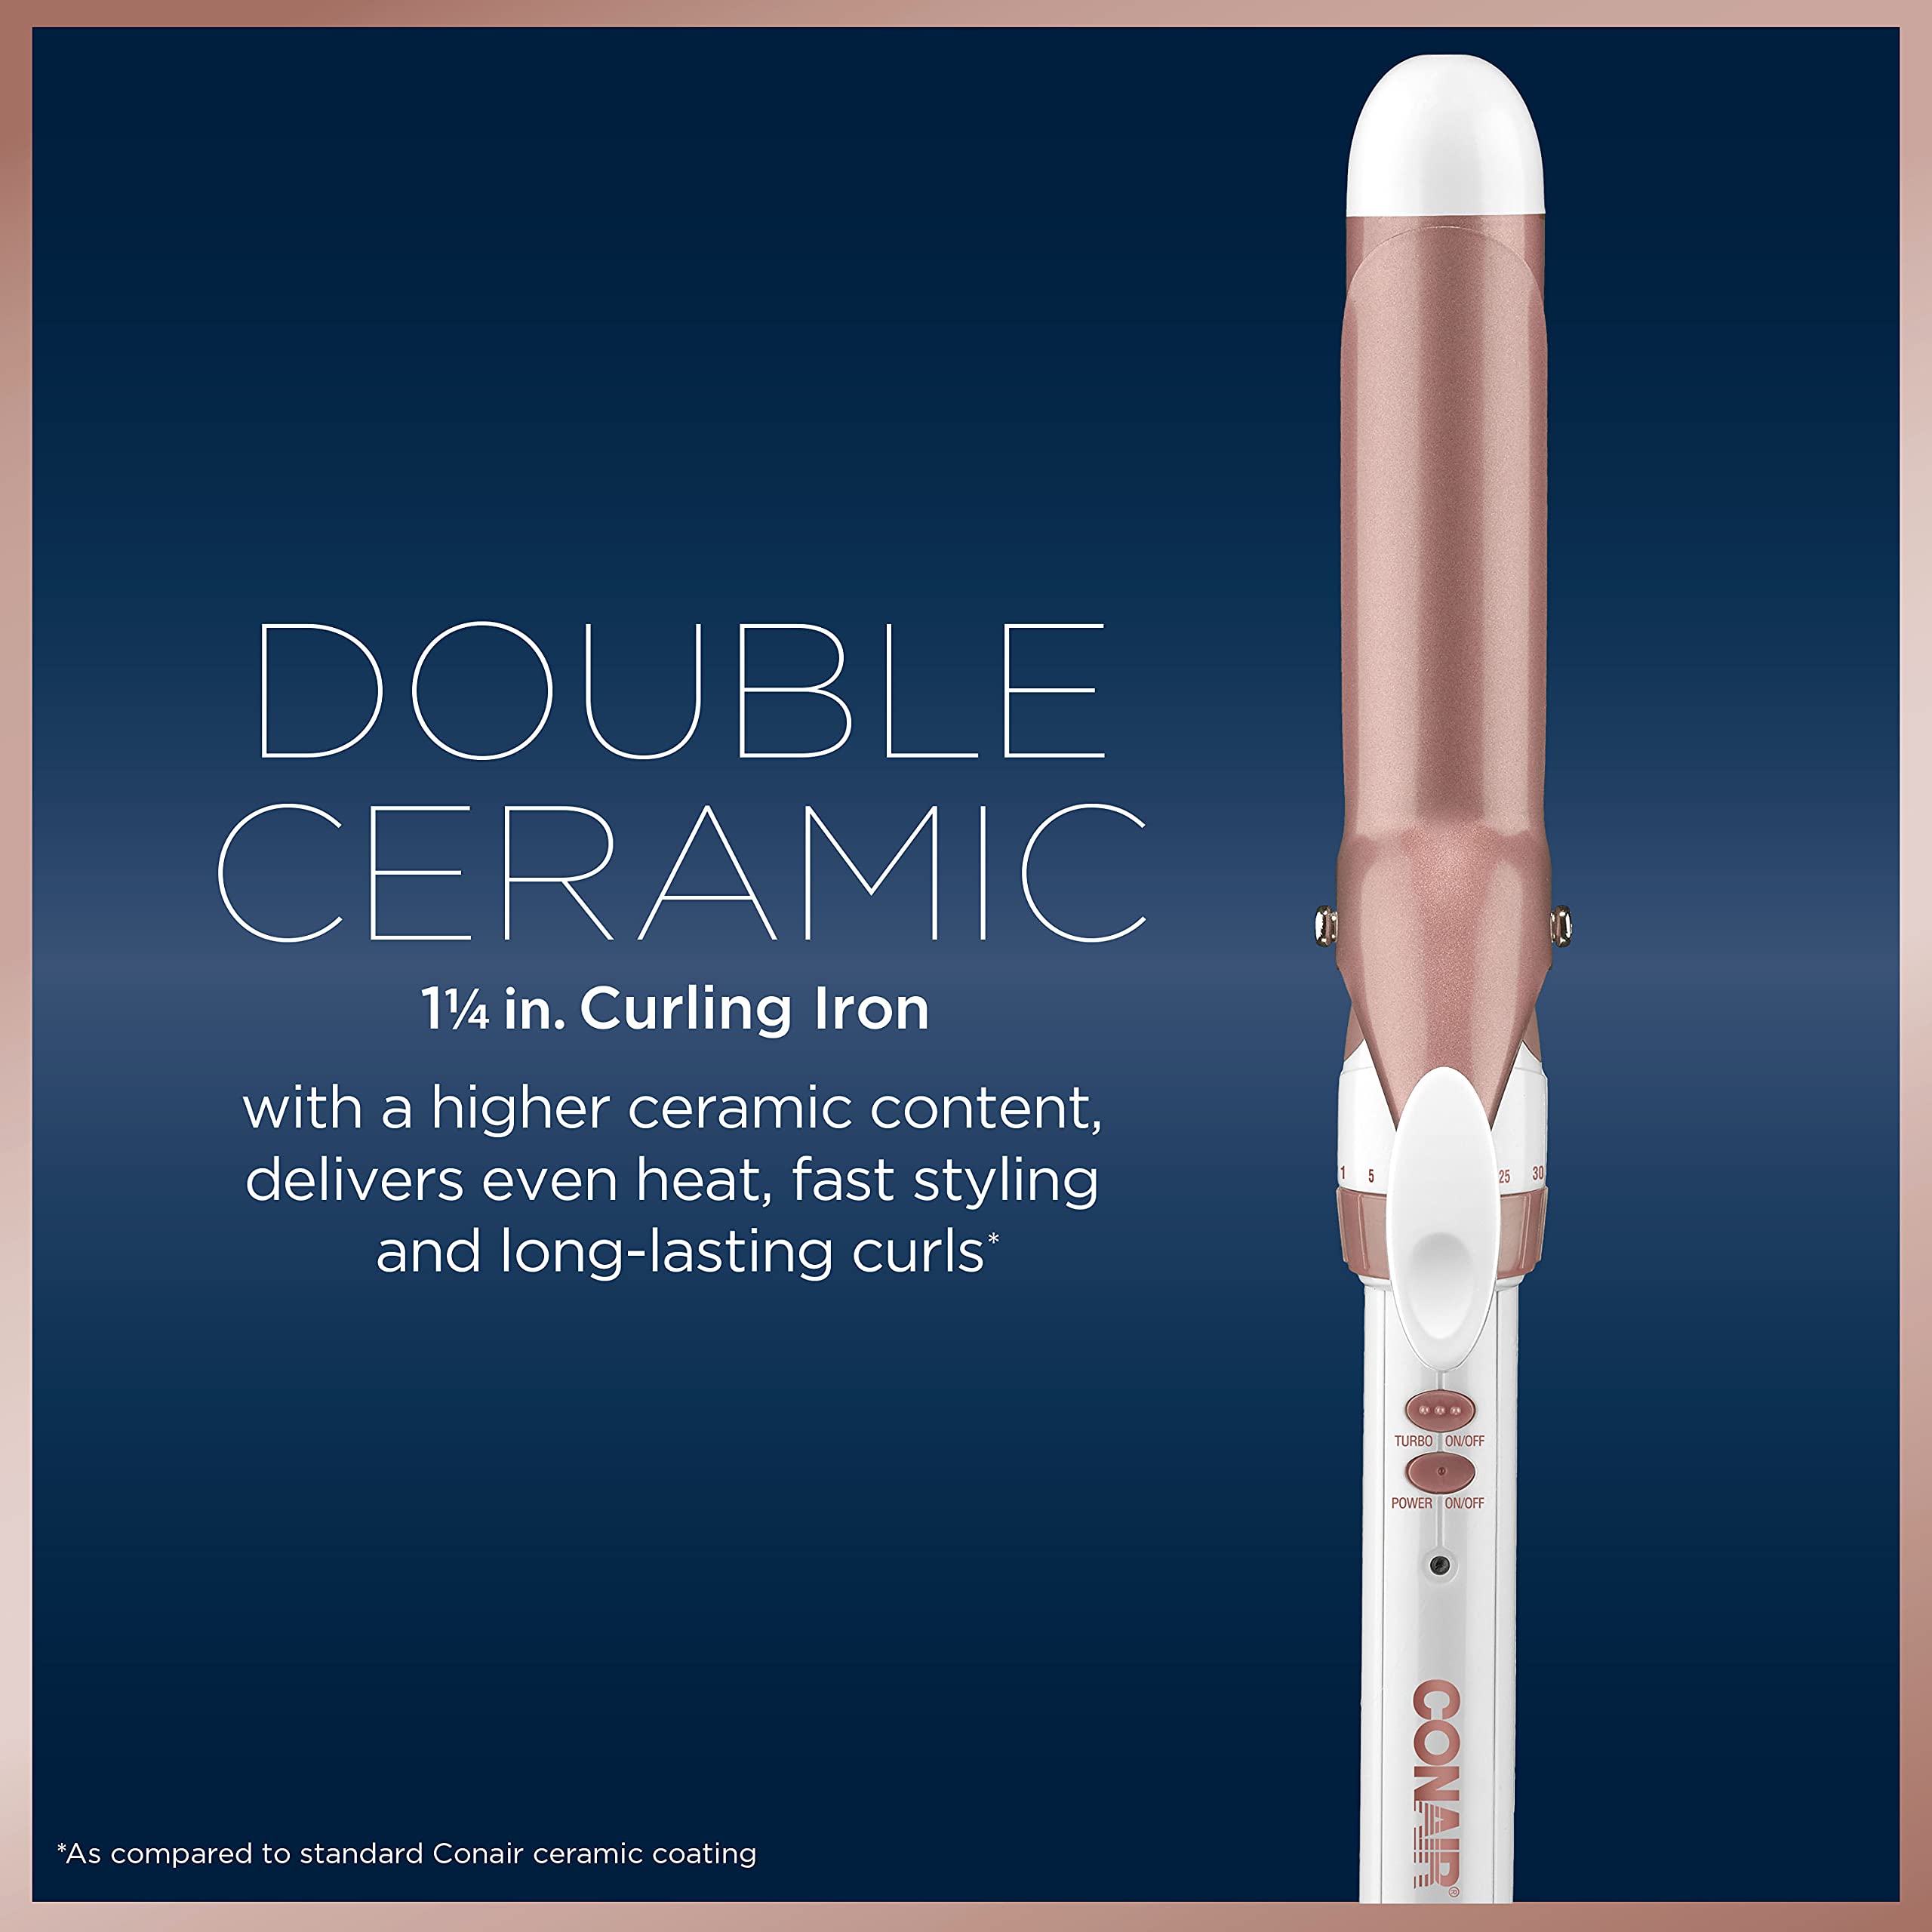 Conair Double Ceramic 1 1/4-Inch Curling Iron, 1 ¼ inch barrel produces loose curls – for use on medium and long hair